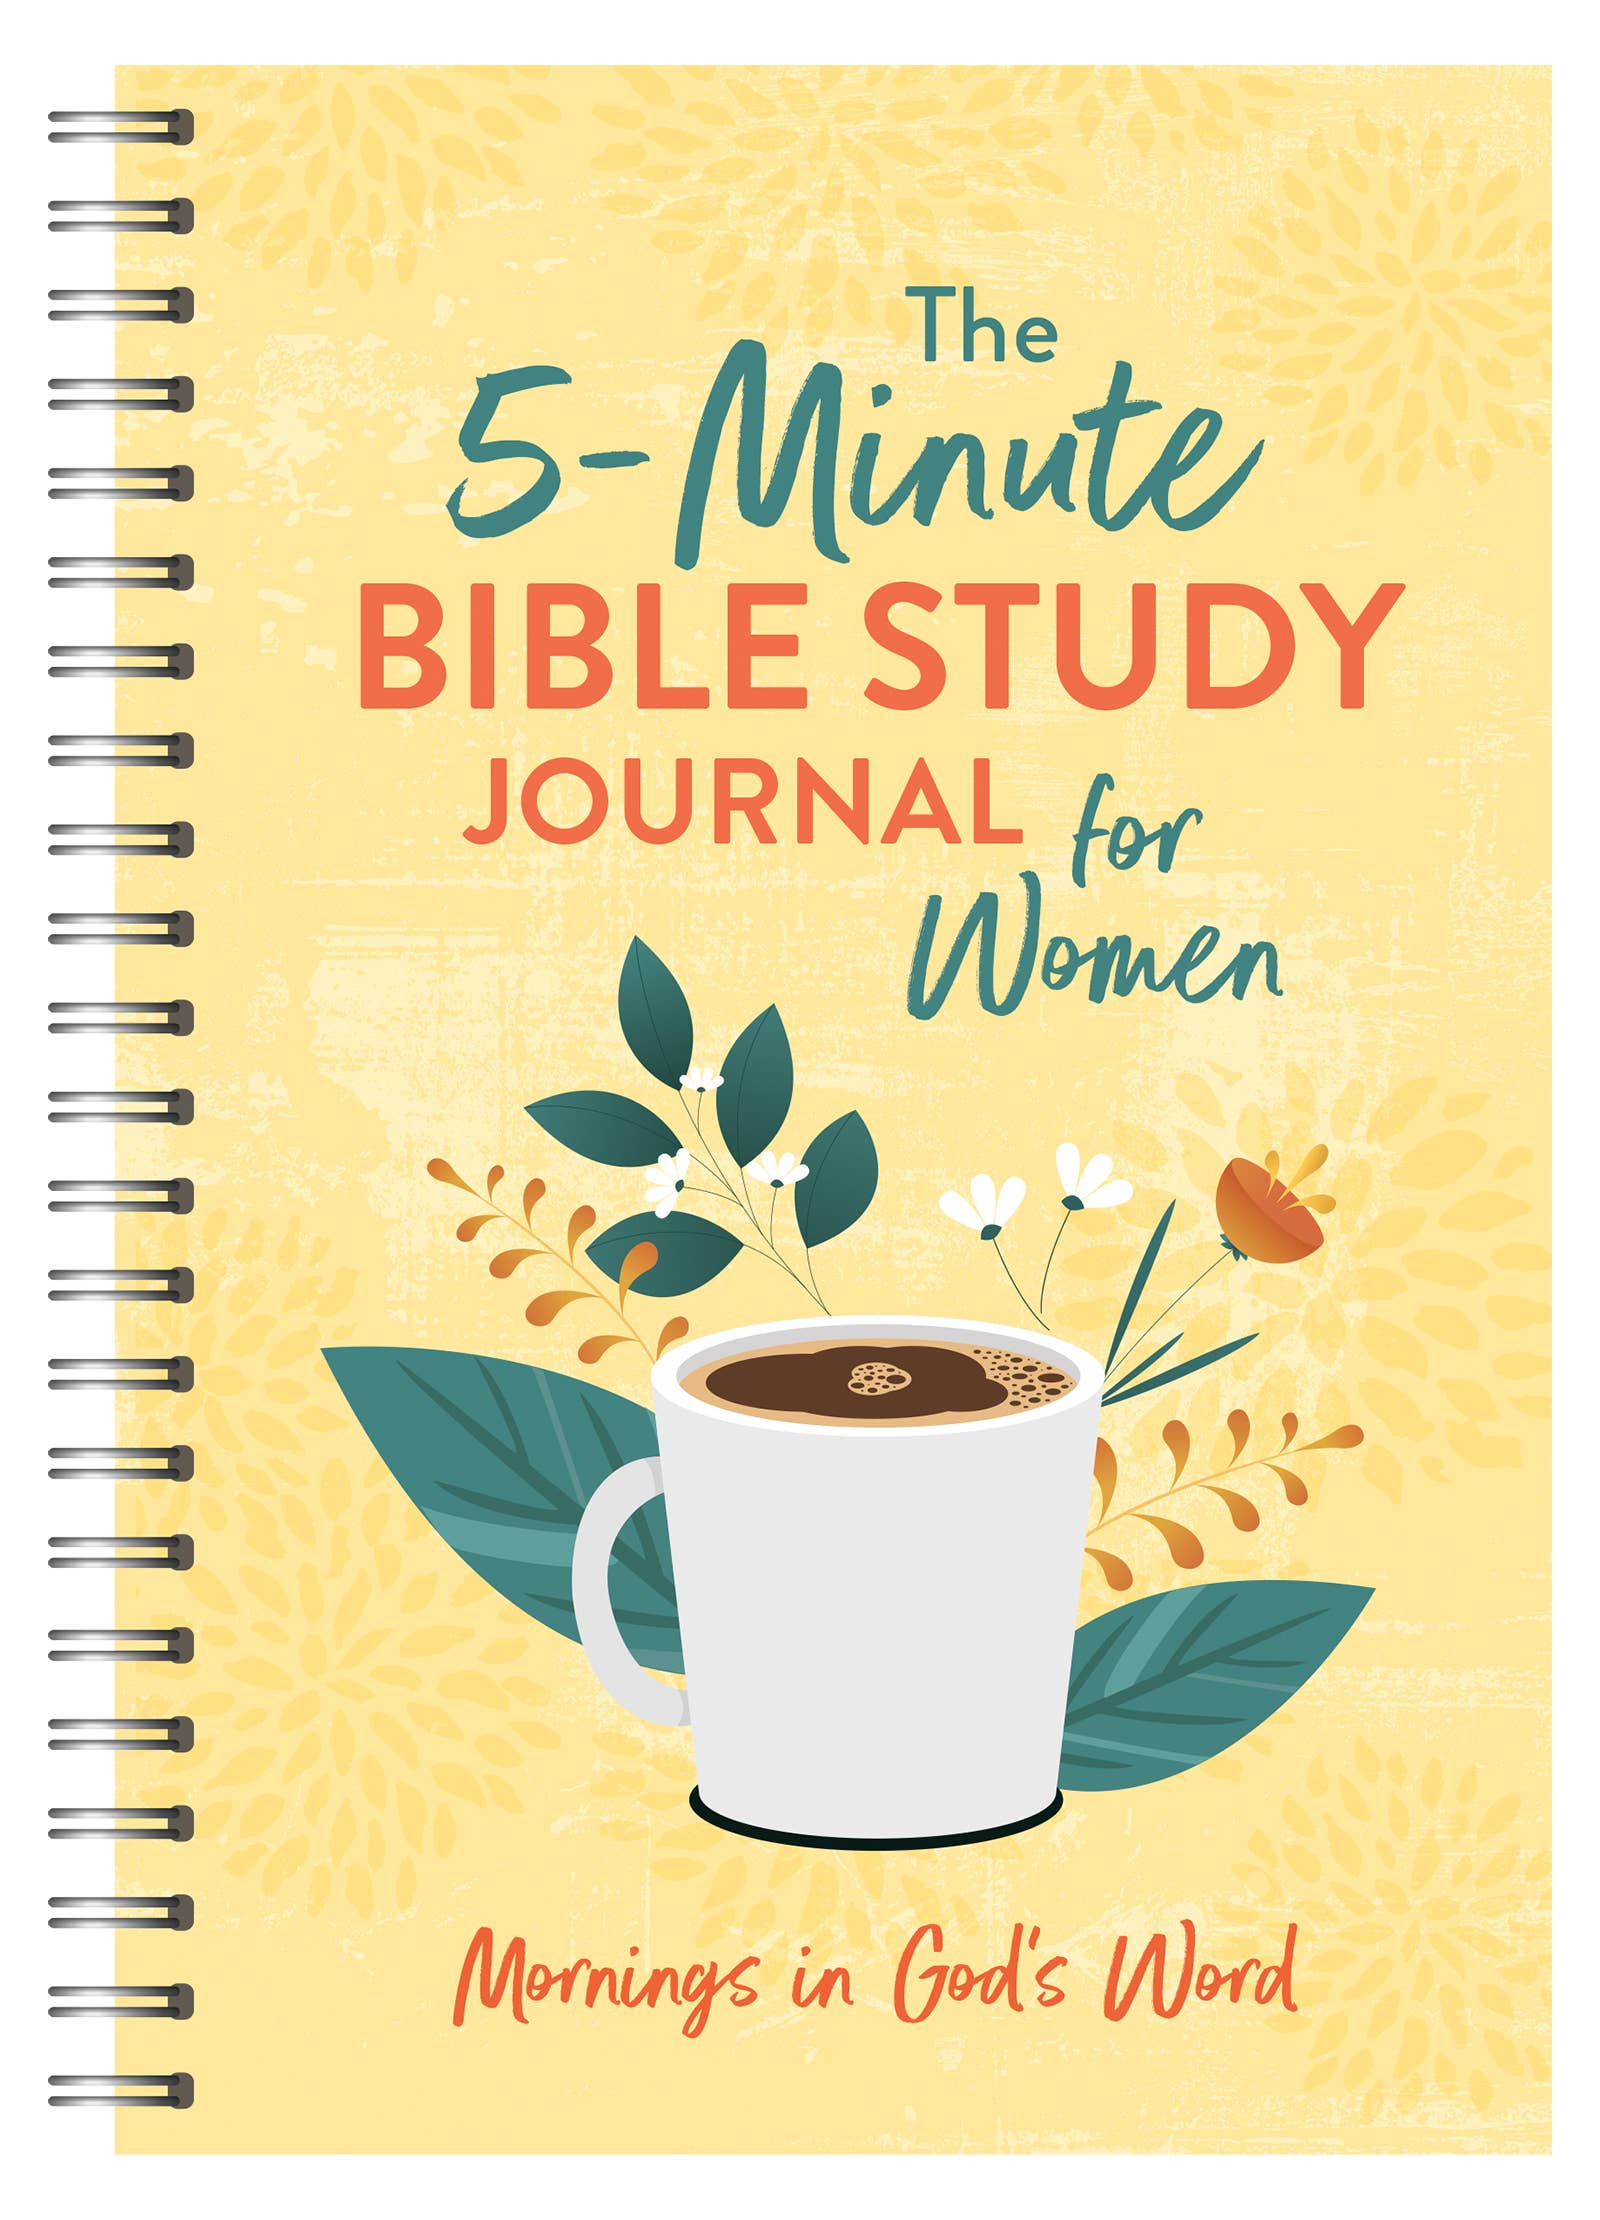 The 5-Minute Bible Study Journal for Women